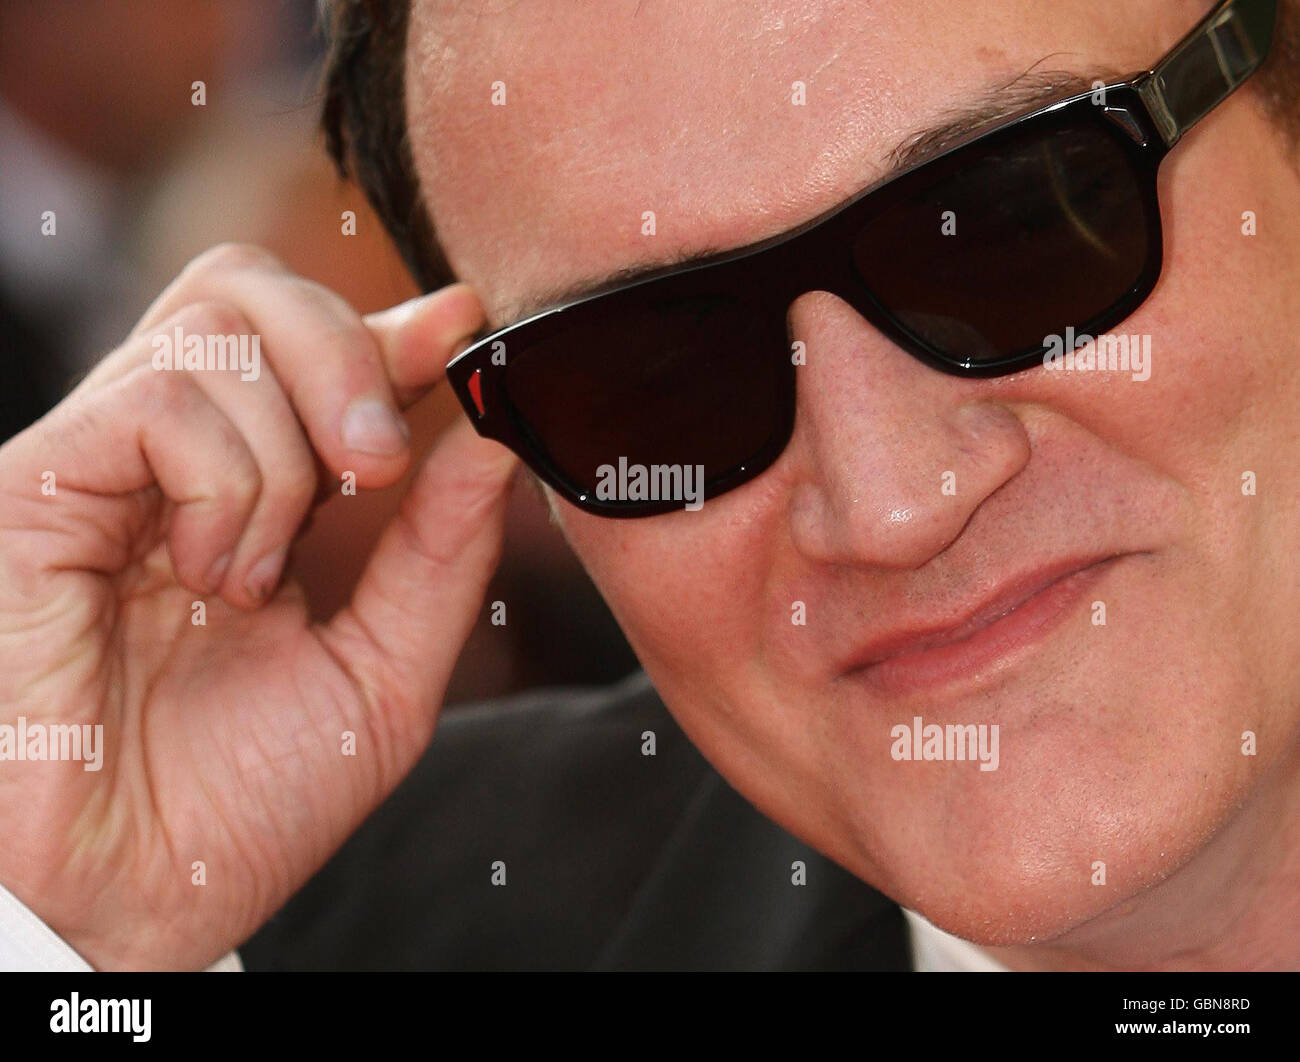 Director Quentin Tarantino arrives at the premiere of 'Vengeance' at the Palais des Festivals, in Cannes, France, part of the 62nd annual Cannes Film Festival. Stock Photo